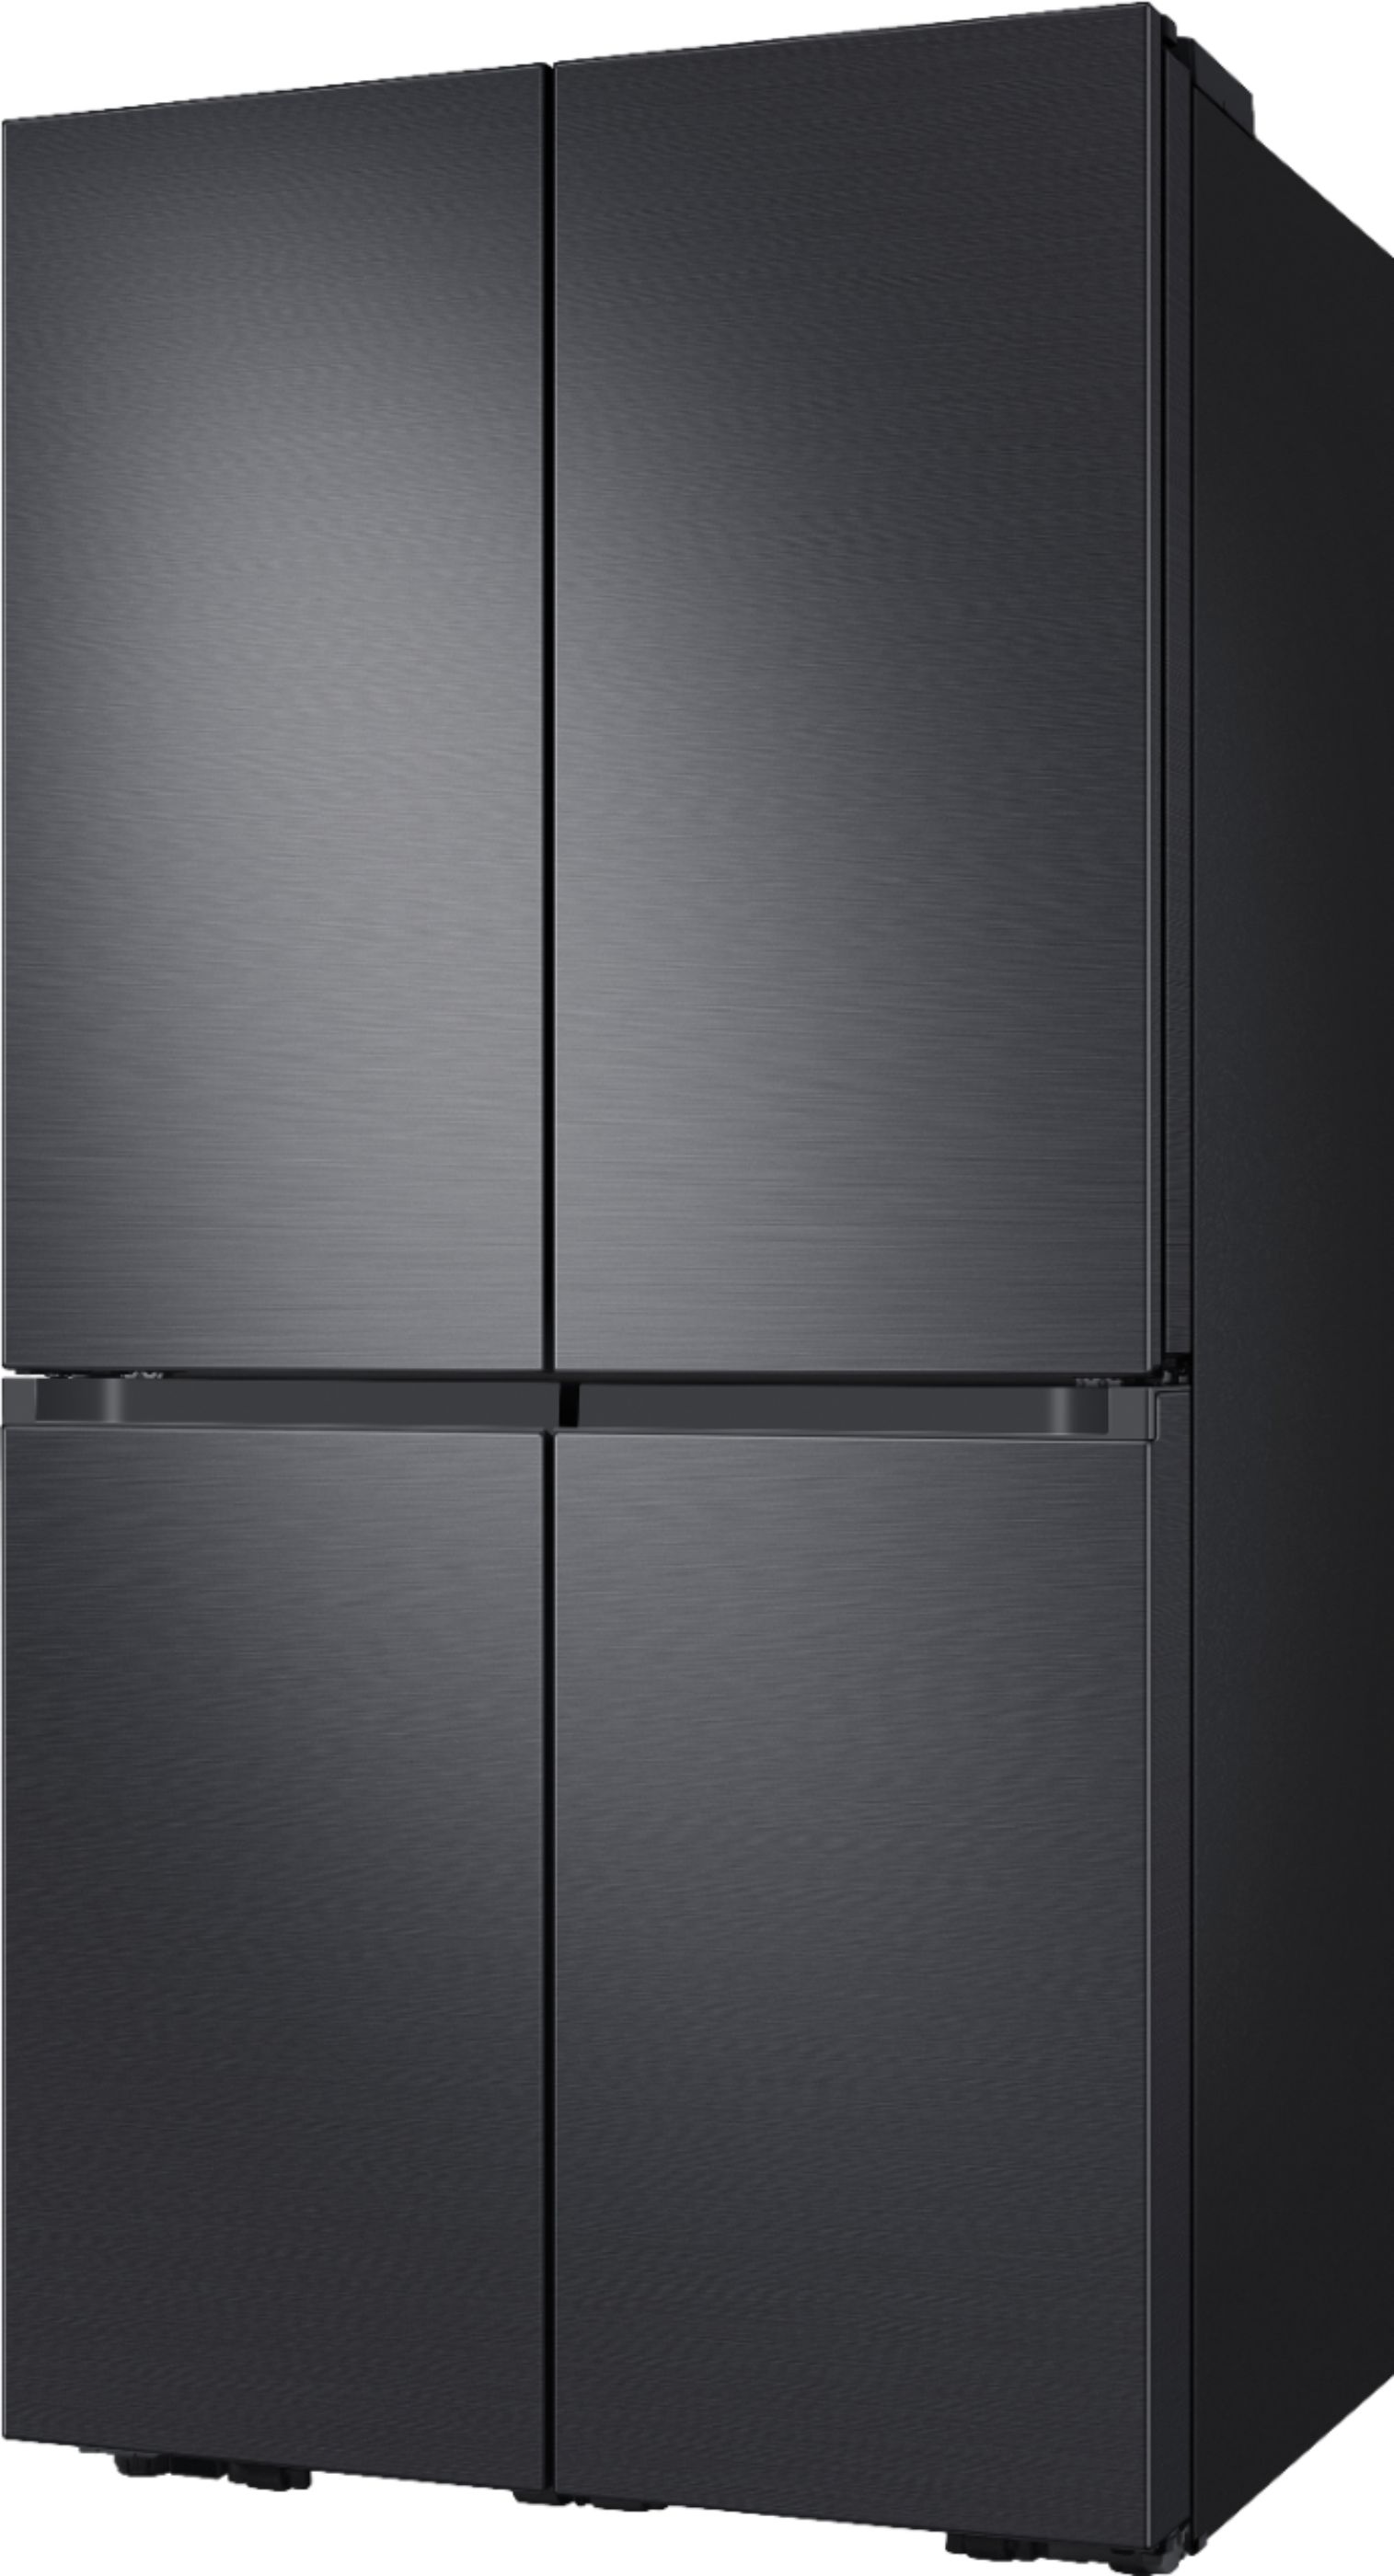 Angle View: Samsung - Bespoke 23 cu. ft. Counter Depth 4-Door French Door Refrigerator with Beverage Center - Morning blue glass